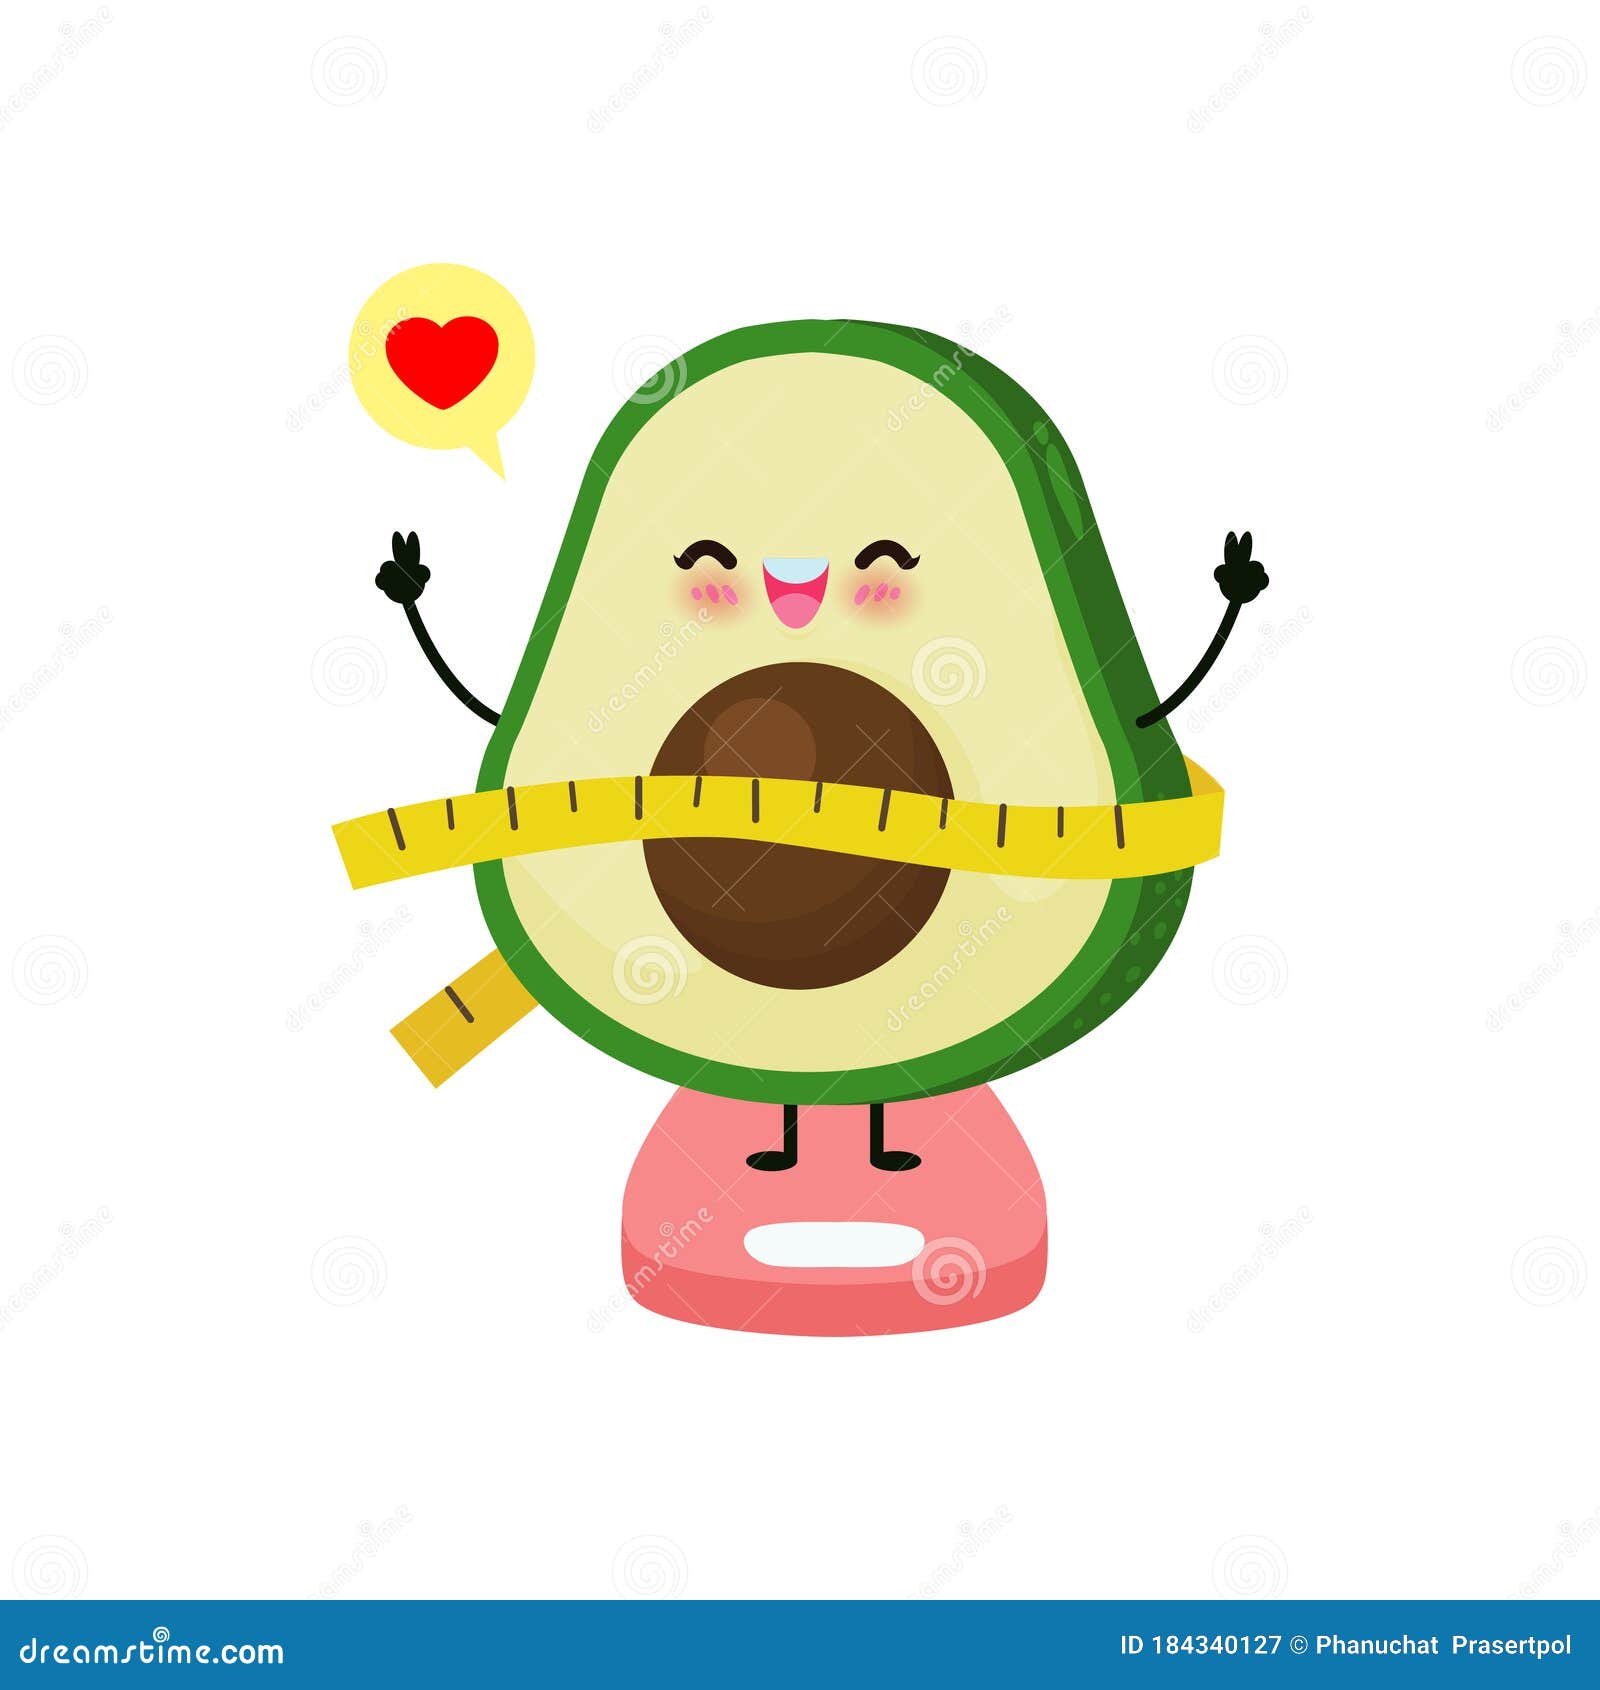 Cartoon Cute Avocado Happy Loss Weight on Weighing Scales, Scales